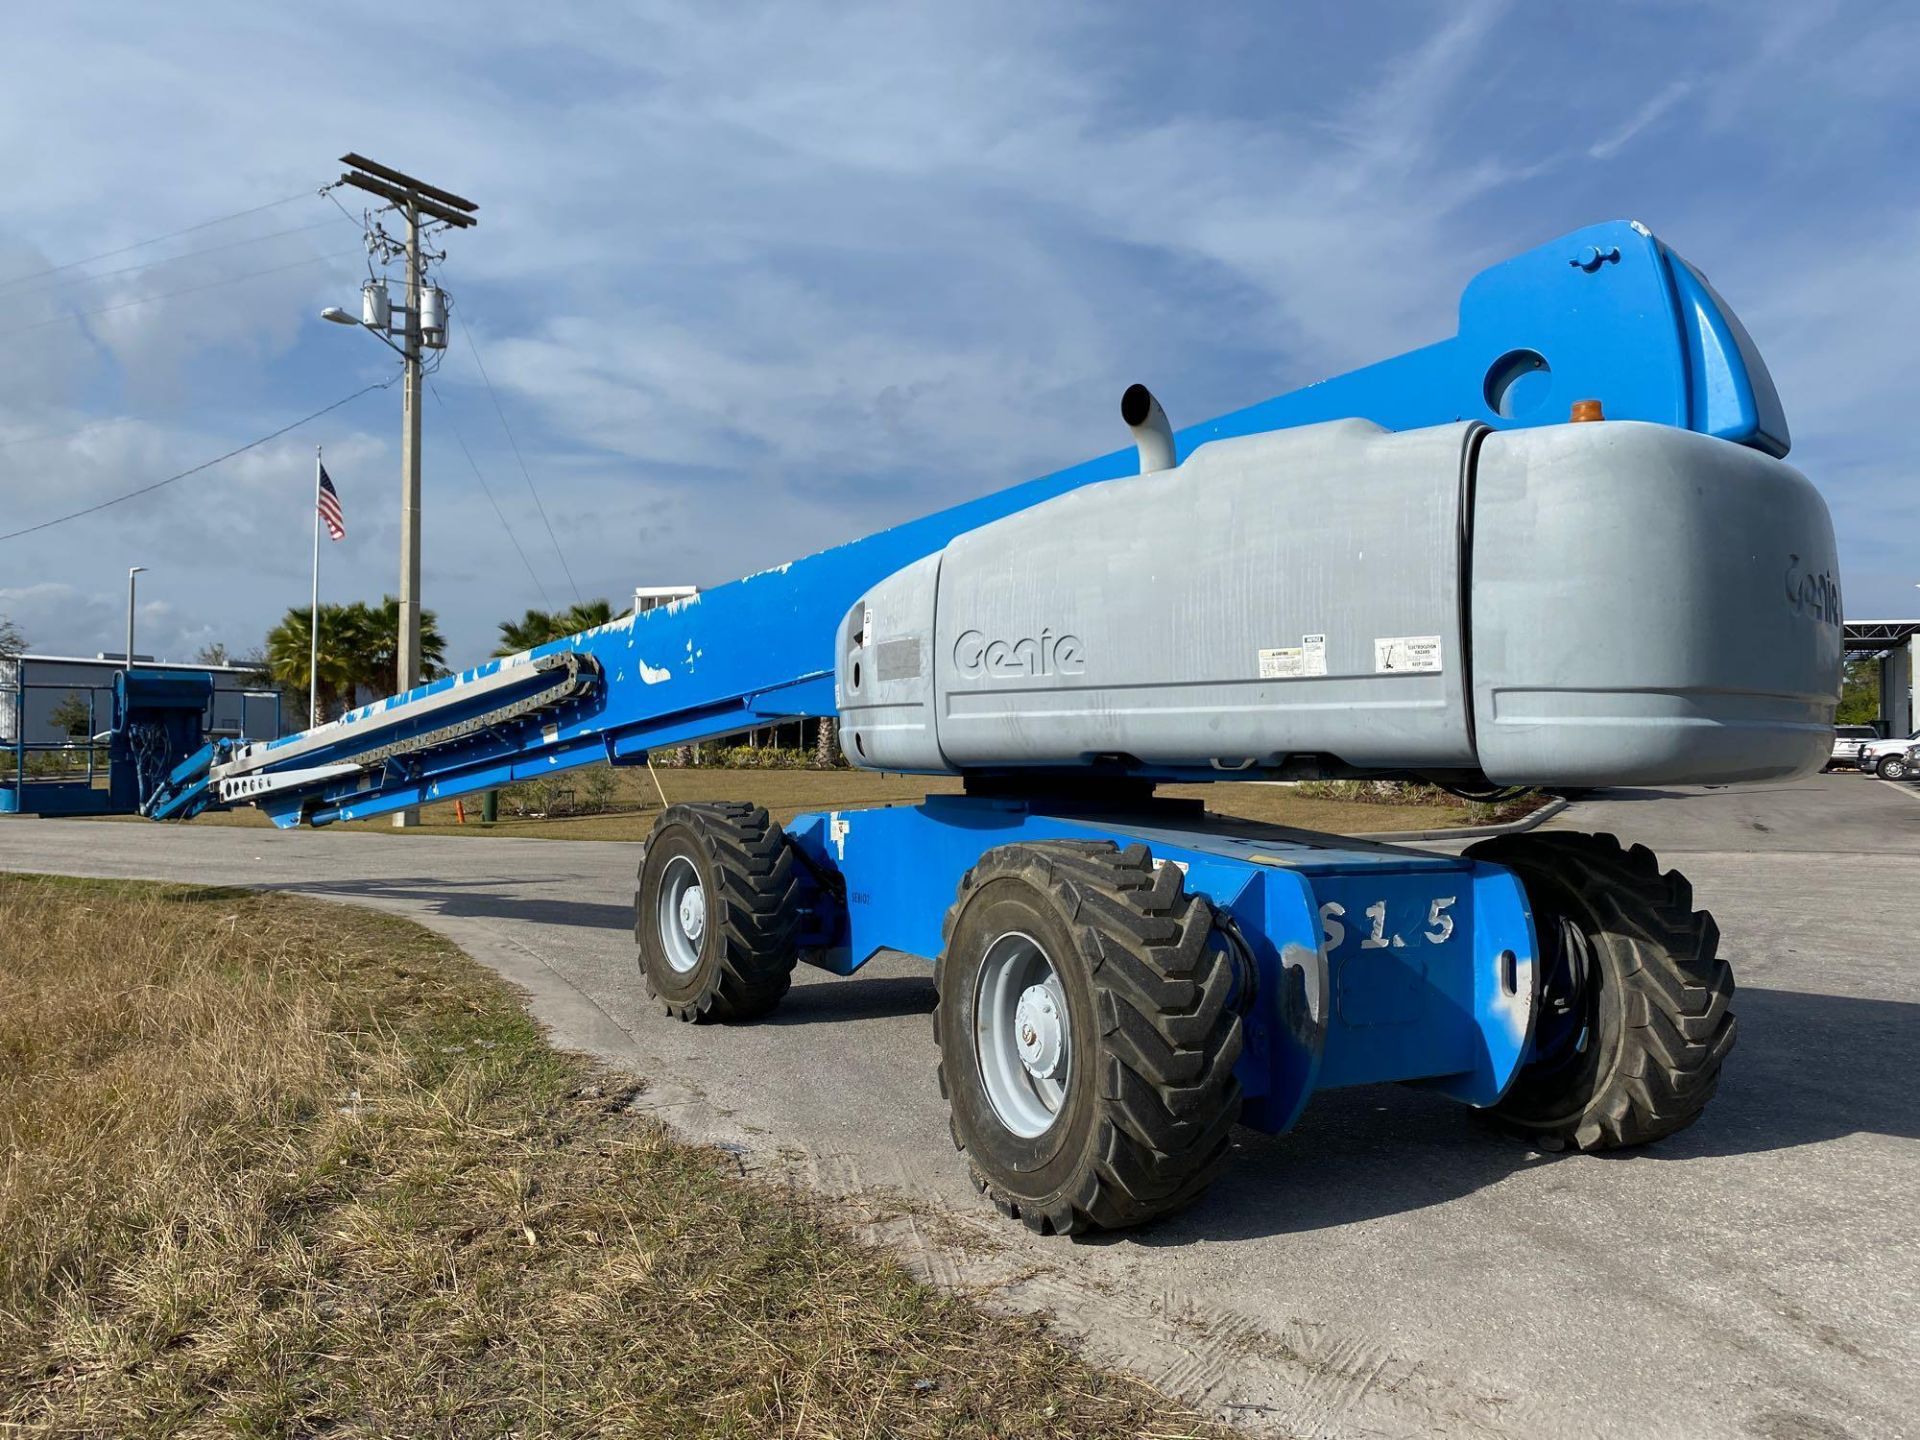 GENIE S125 BOOM LIFT 4x4, POWERED BY PERKINS DIESEL ENGINE, 125FL PLATFORM HEIGHT, RUNS AND OPERATES - Image 3 of 7